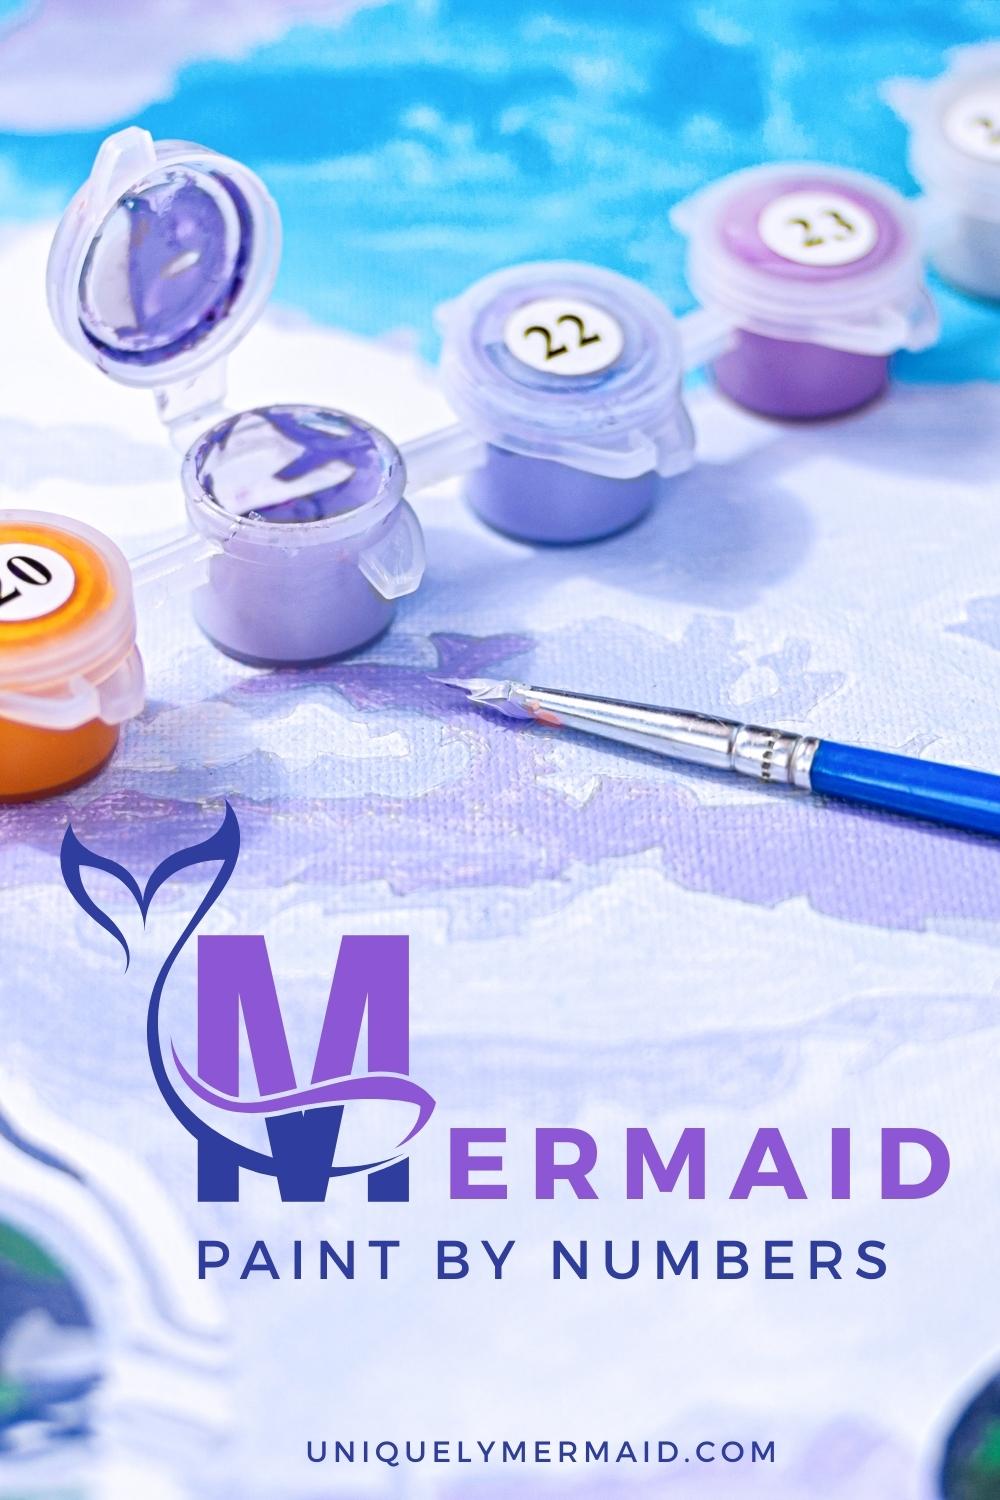 Create your own masterpiece with mermaid paint by numbers. Colorful sea-themed kits for kids and adults, beginner or advanced.